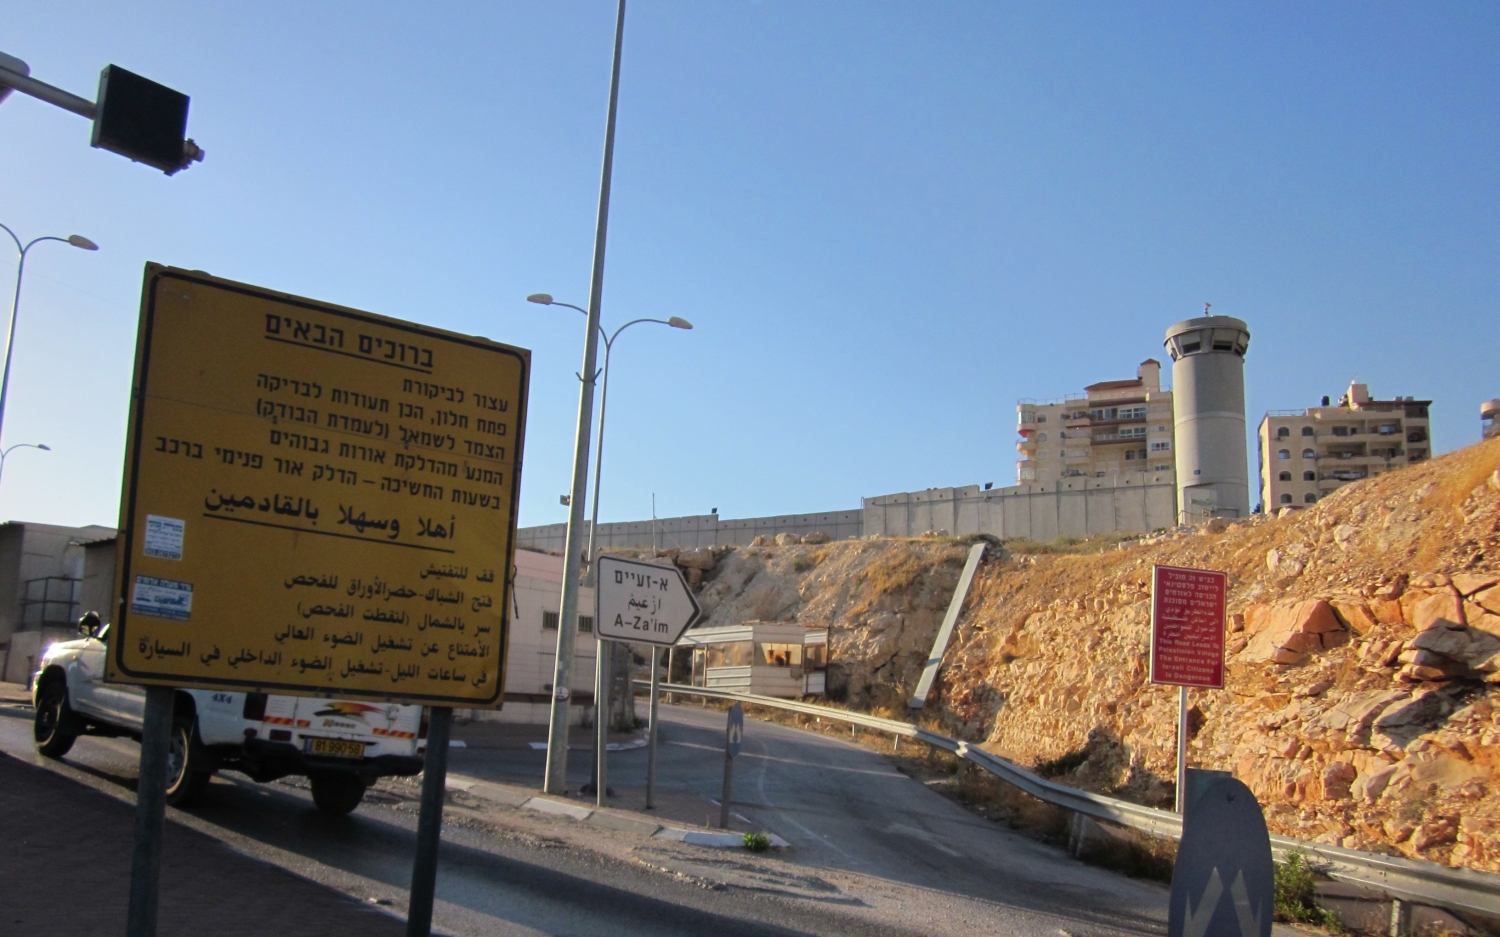 View of Al Za'im and separation wall from Israeli checkpoint